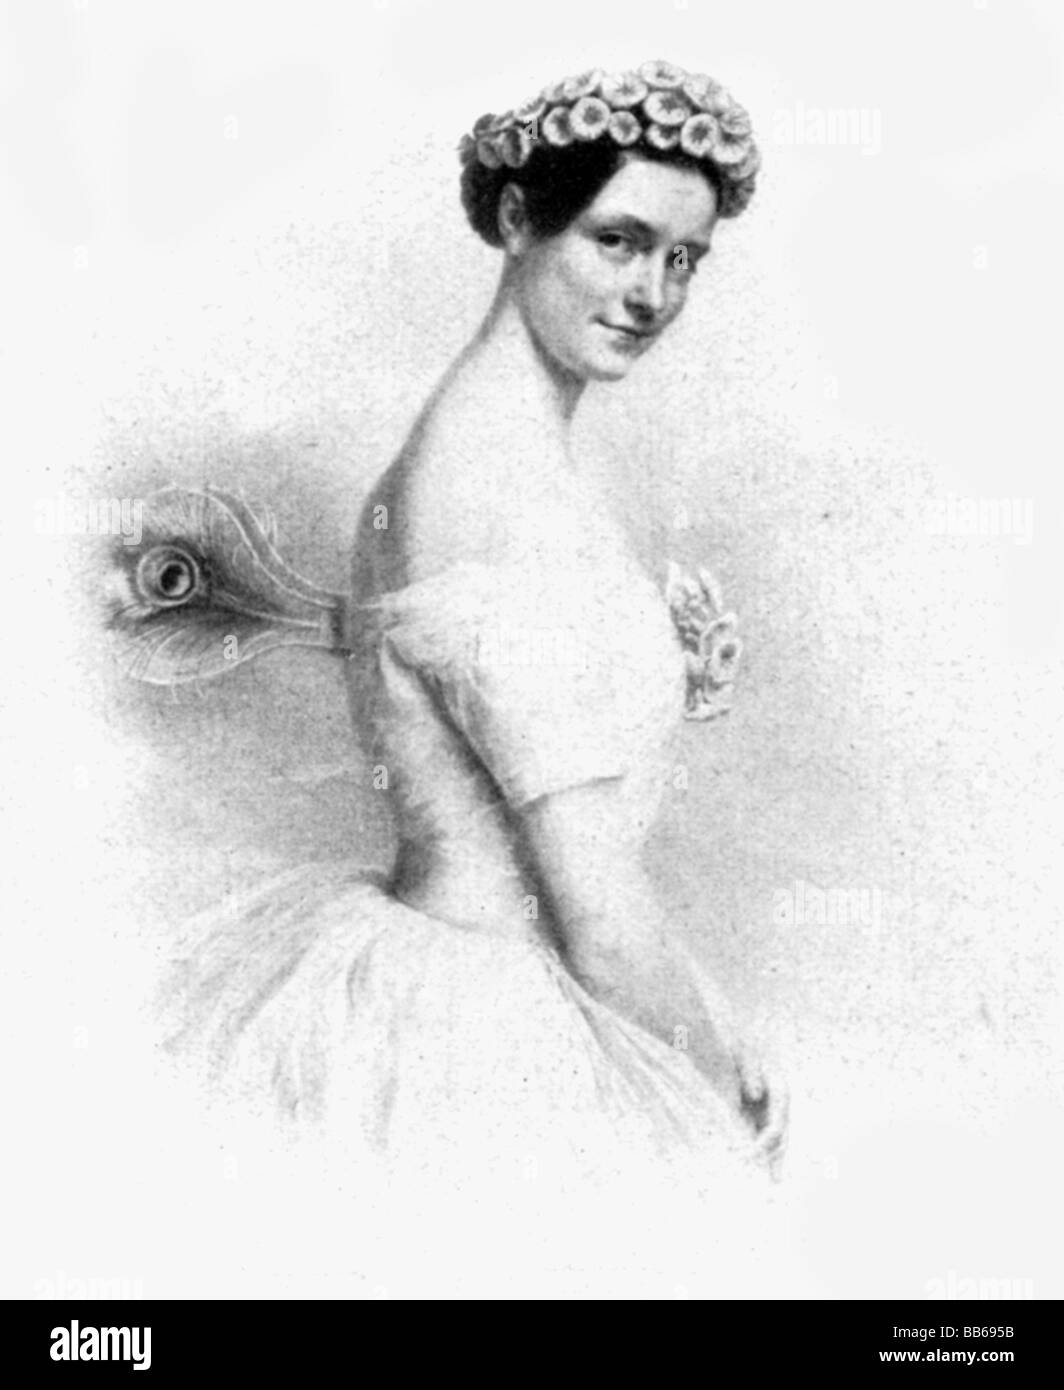 Elssler, Fanny, 23.10.1810 - 27.11.1884, Austrian ballerina, half length, contemporaneous lithograph, after painting by Adolph Henning 1832, Stock Photo